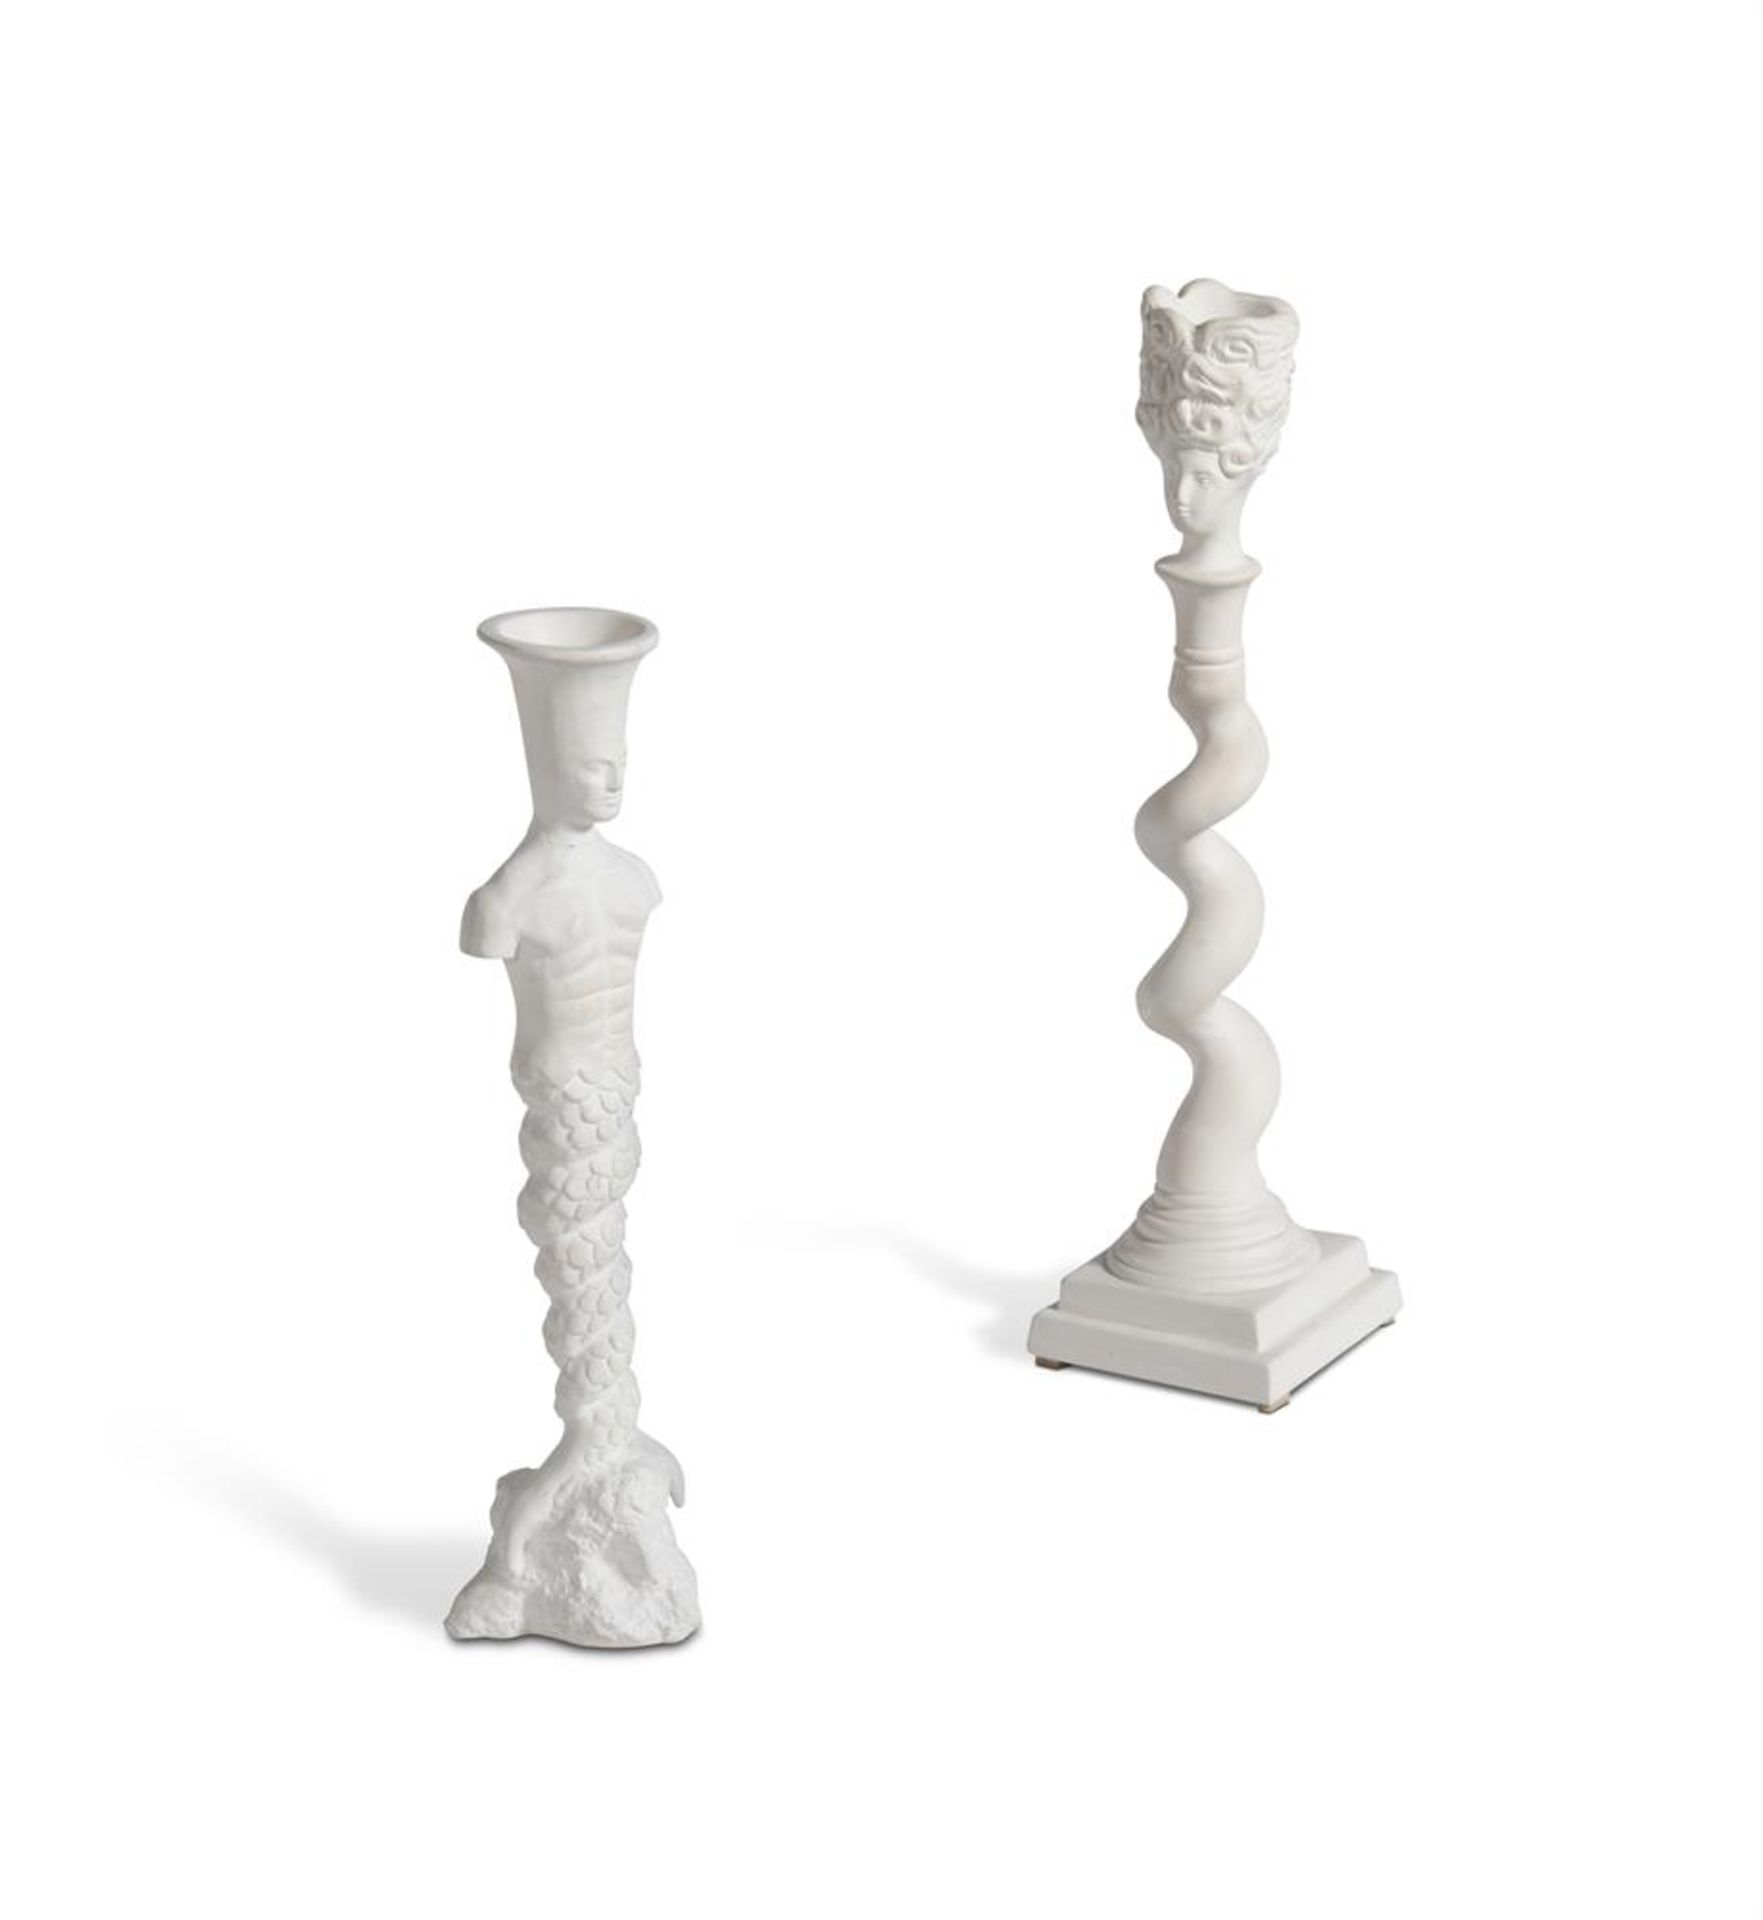 A PAIR OF MOULDED PLASTER FIGURAL CANDLESTICKS, MODERN